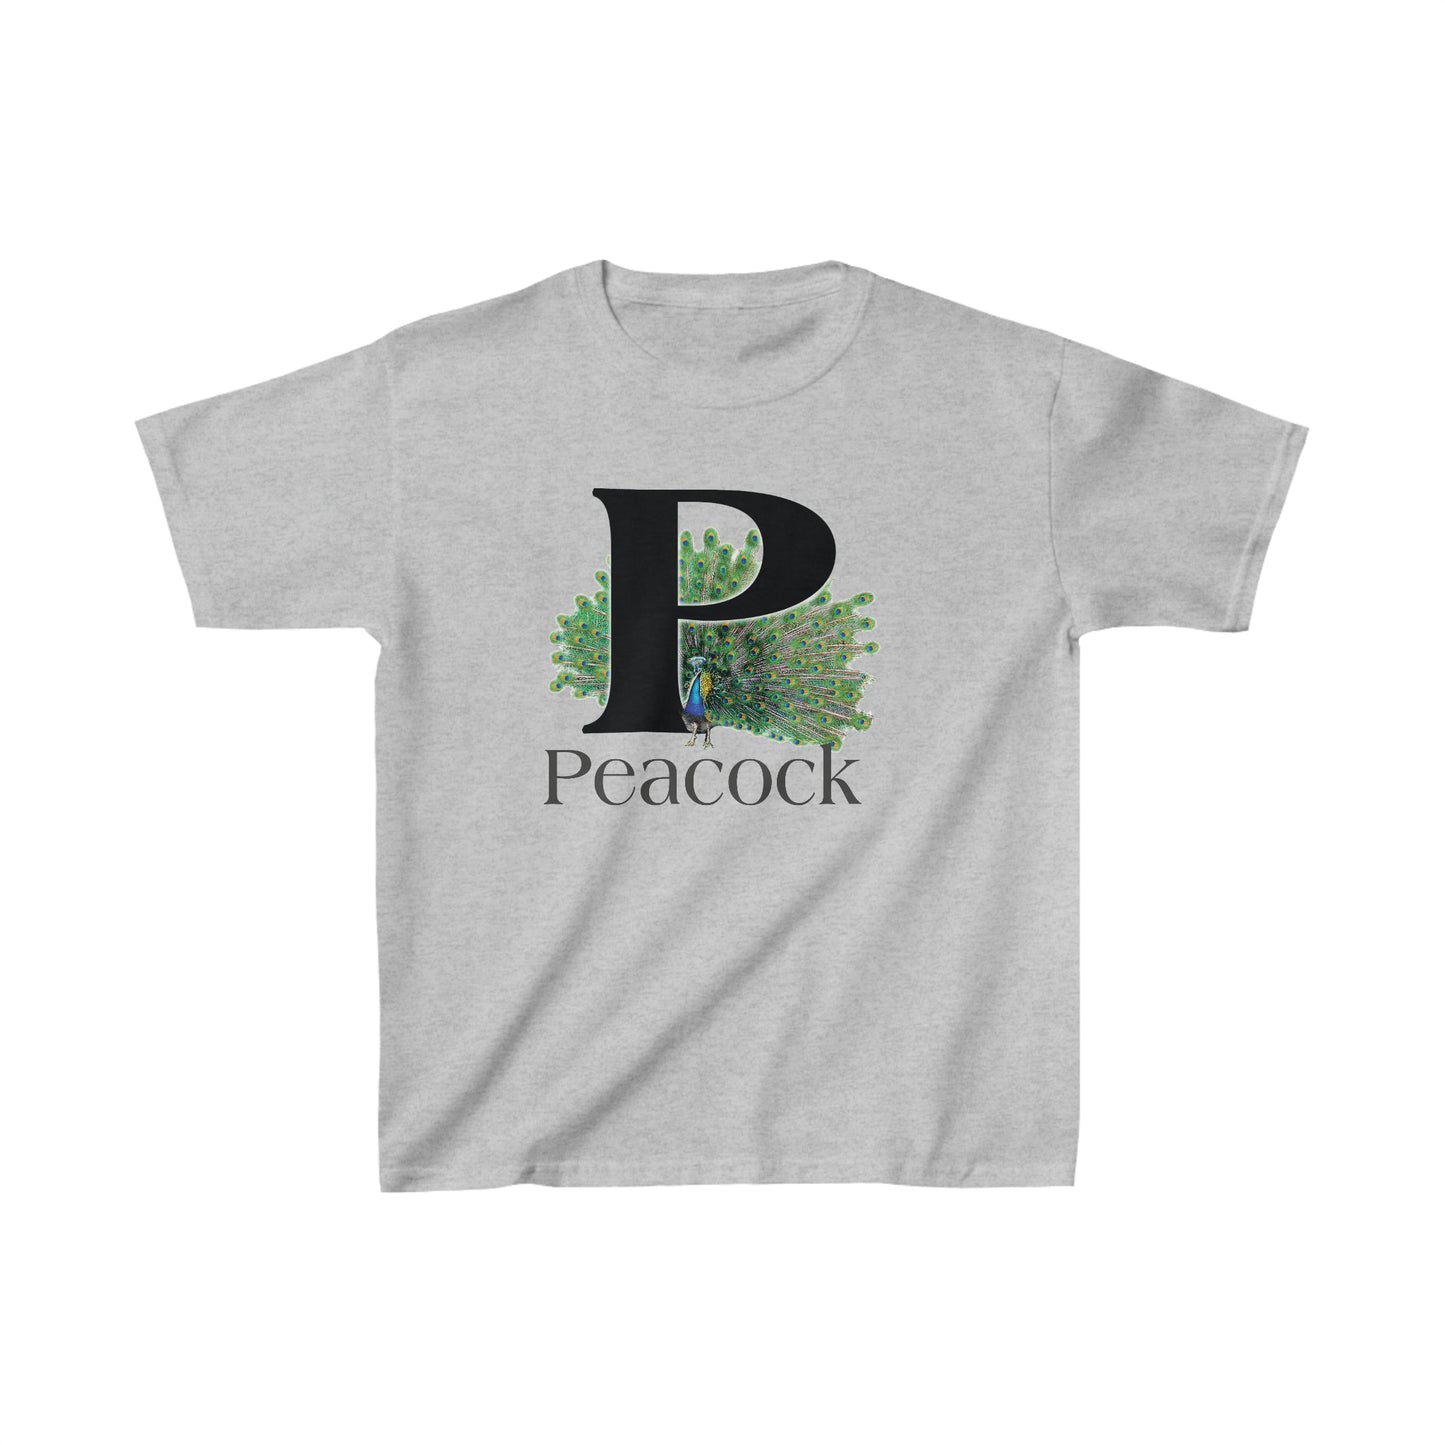 Peacock Letter P T-Shirt, Peacock Feathers Fanned out, Bird Shirt, Drawing T-Shirt, animal t-shirt, animal alphabet T, animal letters